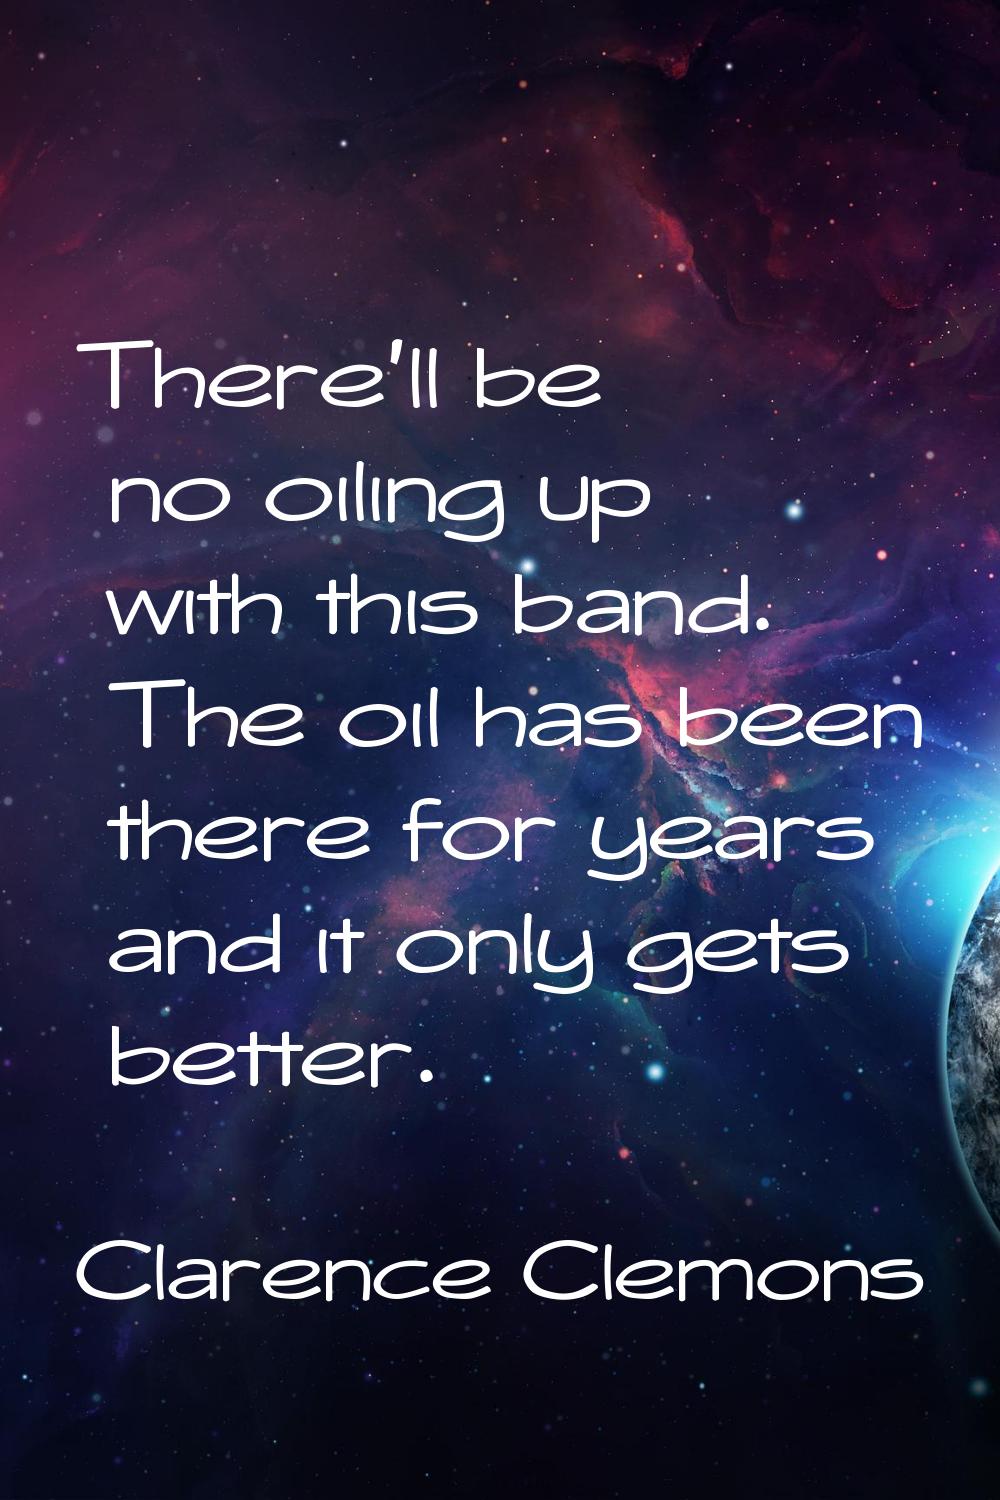 There'll be no oiling up with this band. The oil has been there for years and it only gets better.